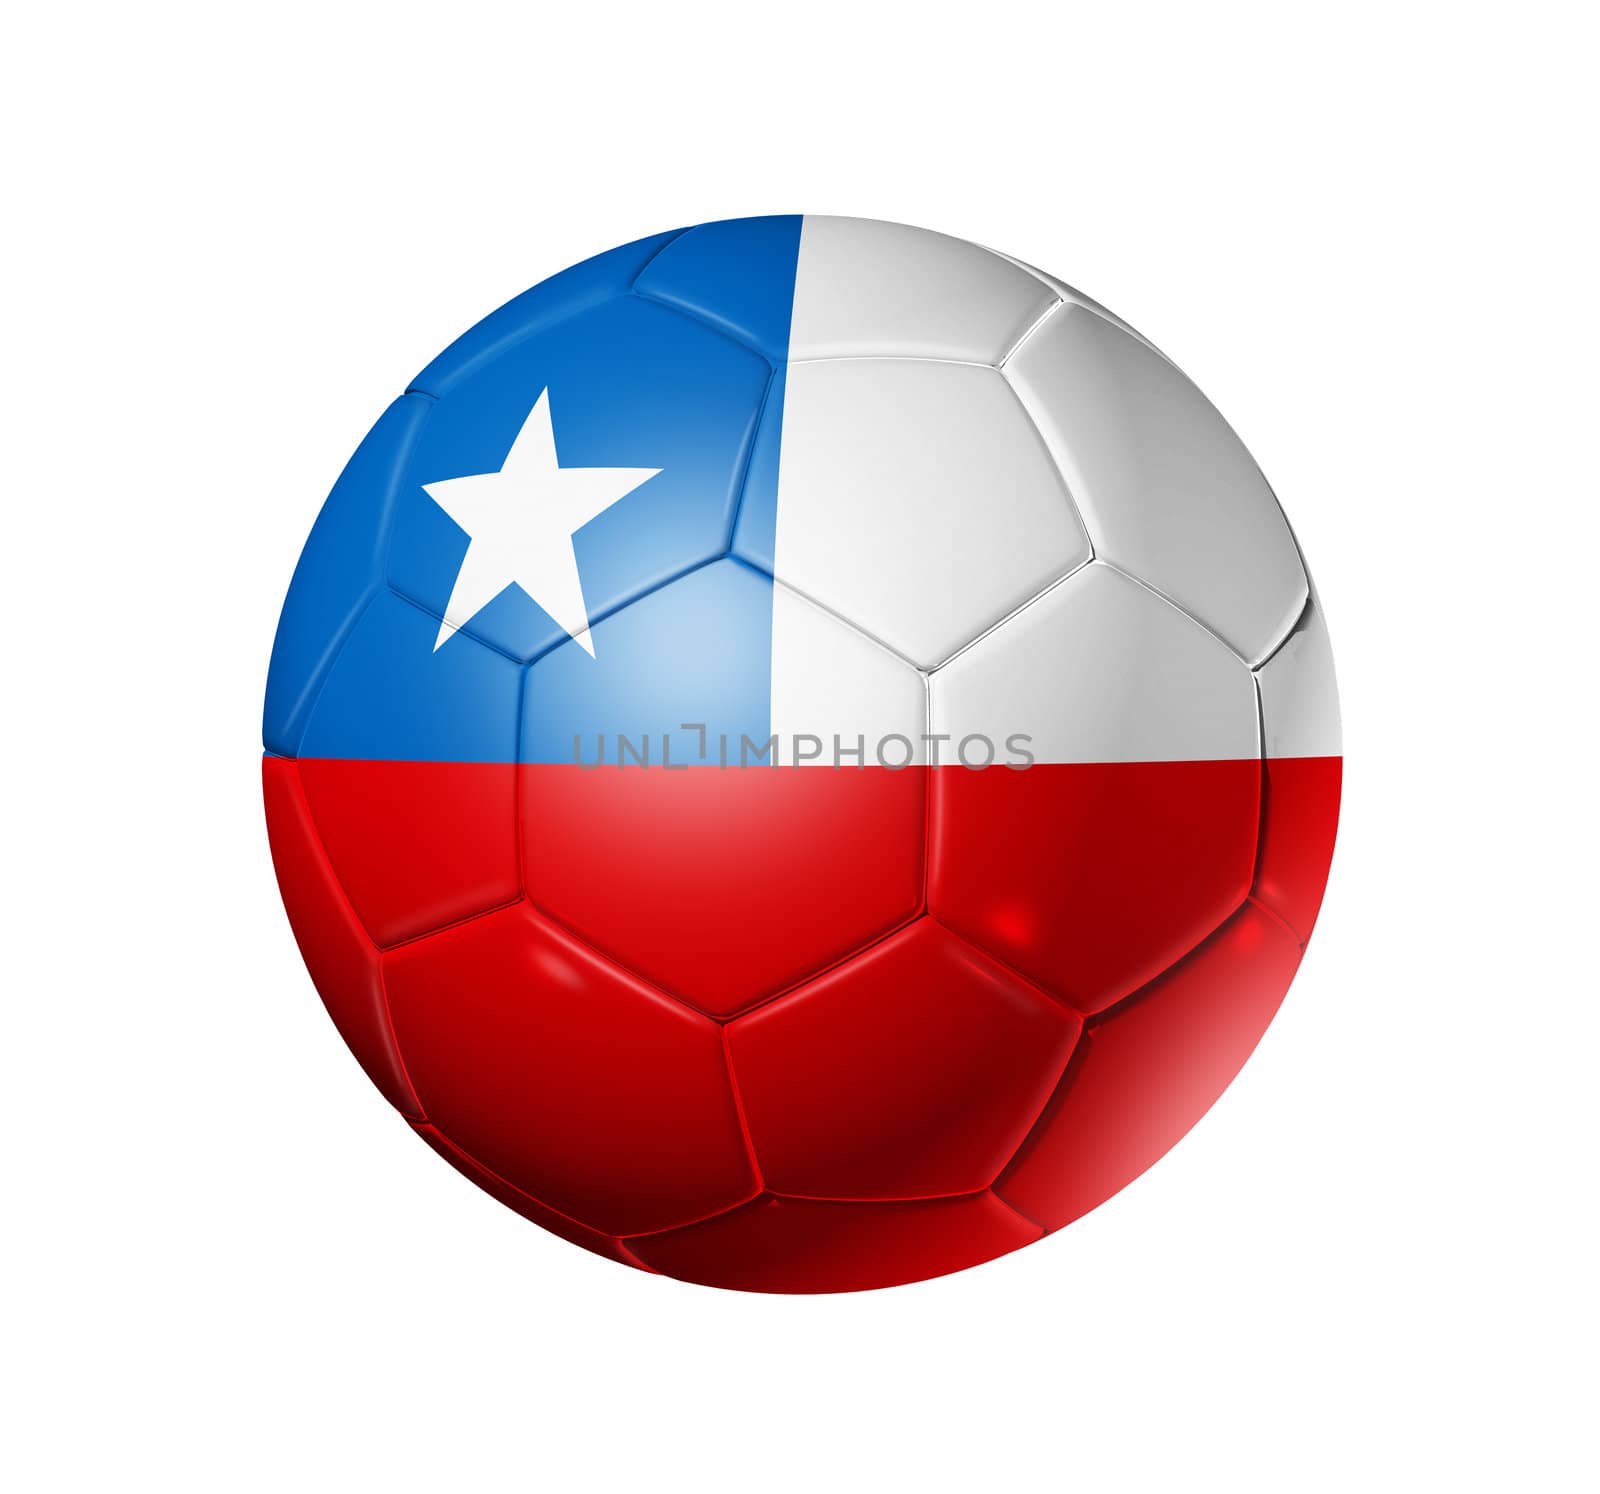 3D soccer ball with Chile team flag, world football cup 2010. isolated on white with clipping path